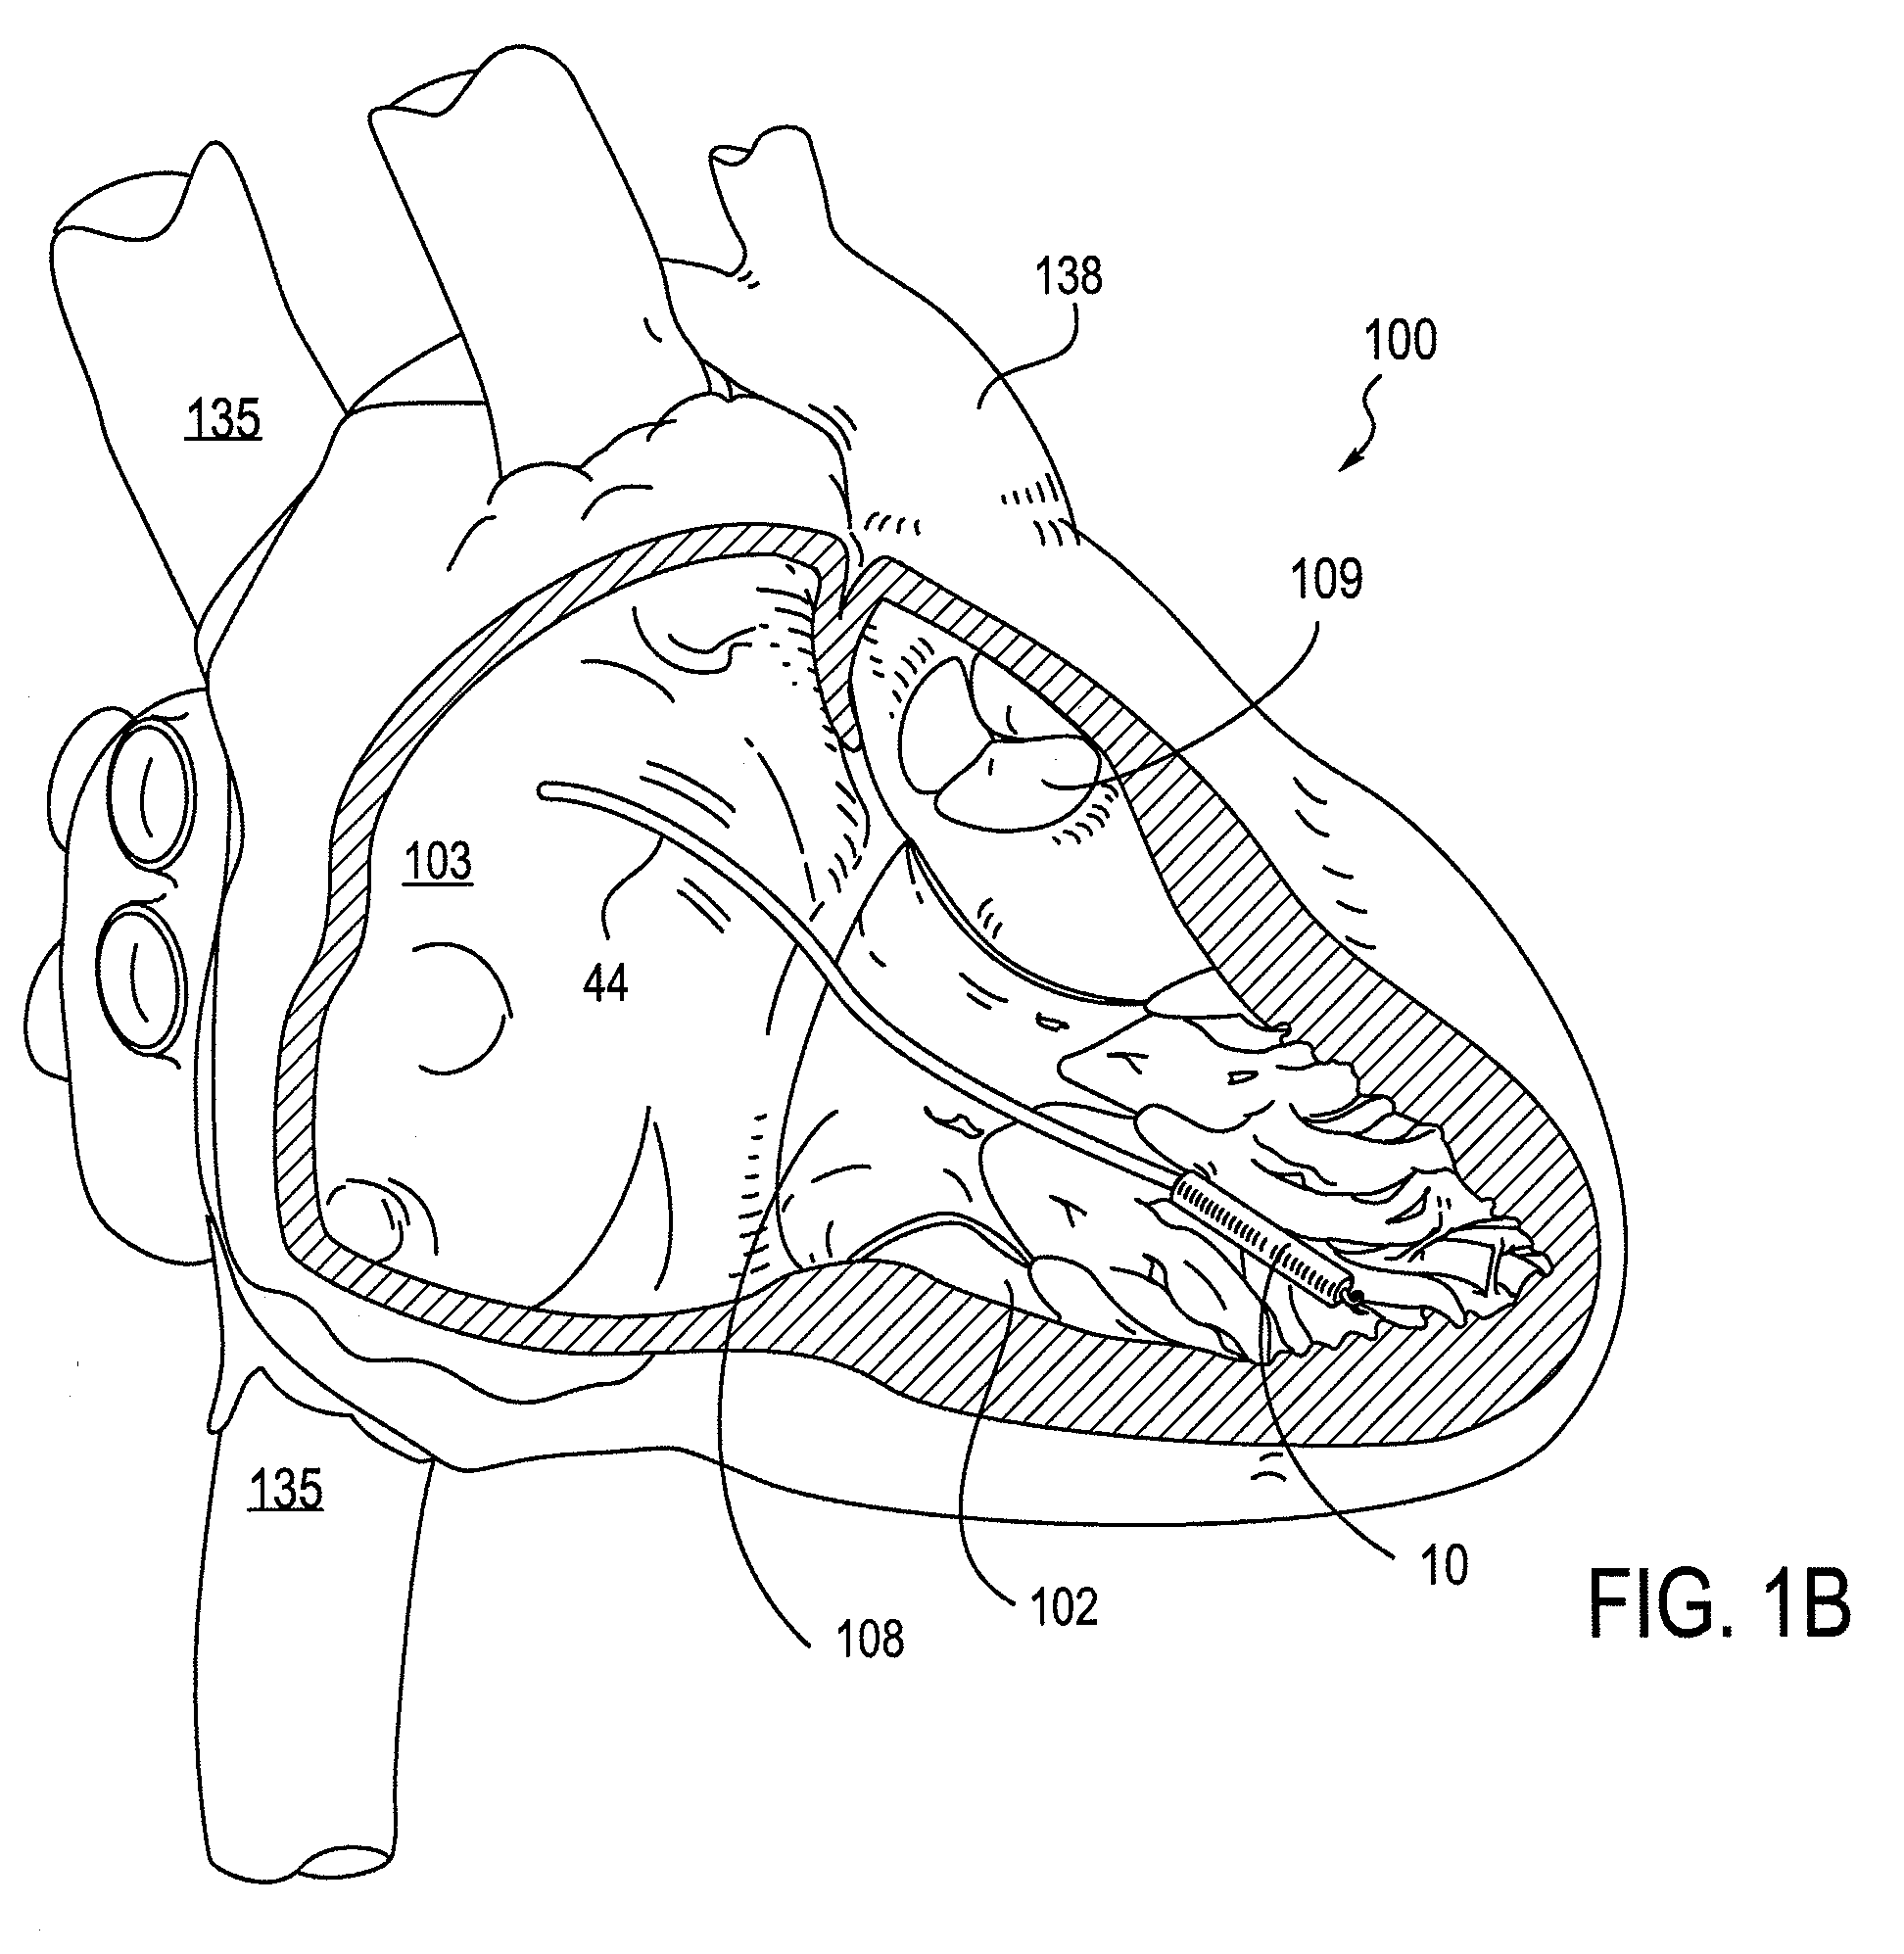 Leadless cardiac pacemaker with secondary fixation capability